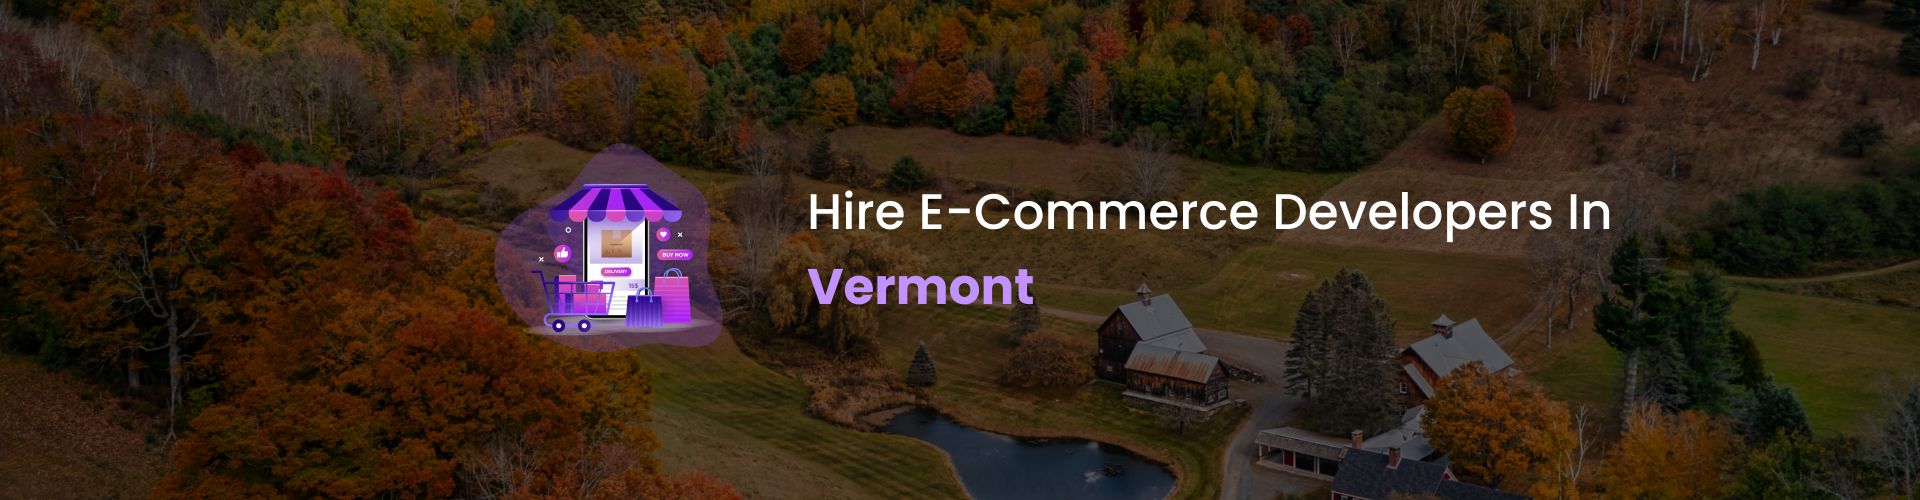 hire ecommerce developers in vermont